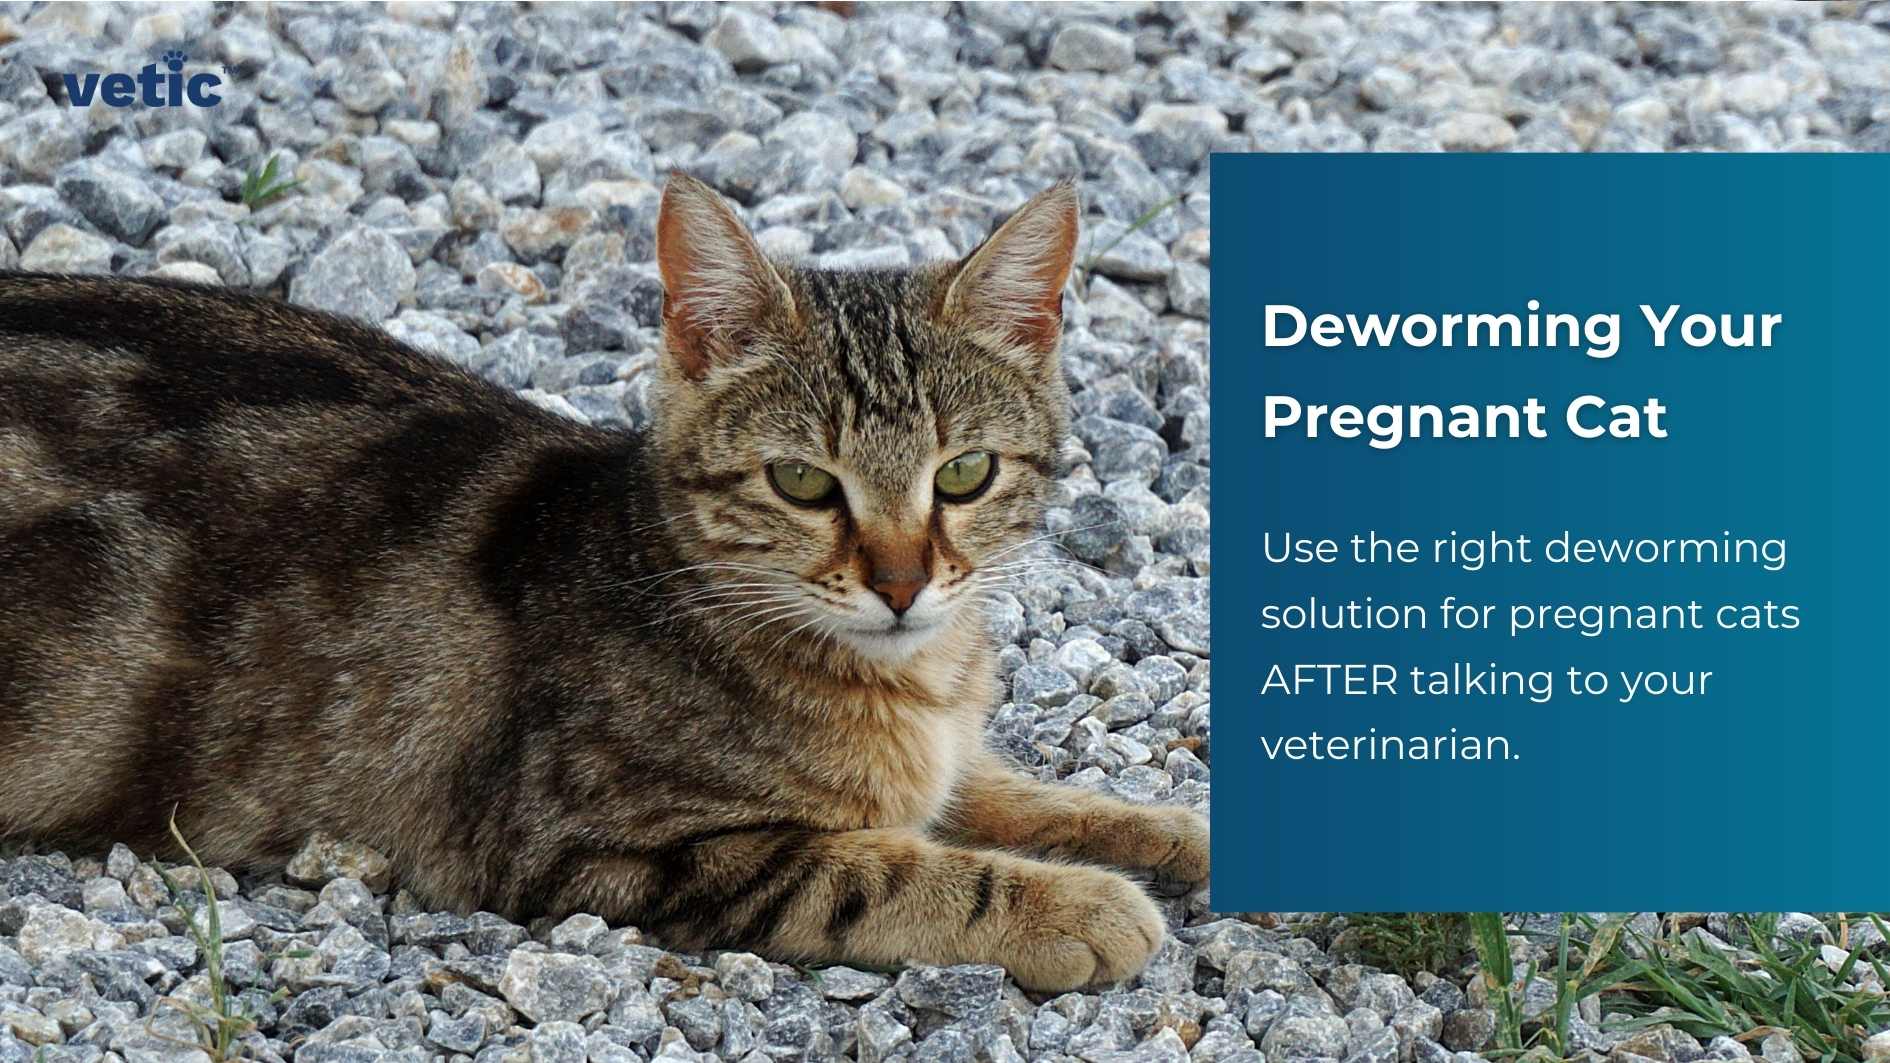 he image shows a cat laying on a gravel surface with a blue informational box to the right that reads “Deworming Your Pregnant Cat: Use the right deworming solution for pregnant cats AFTER talking to your veterinarian.”